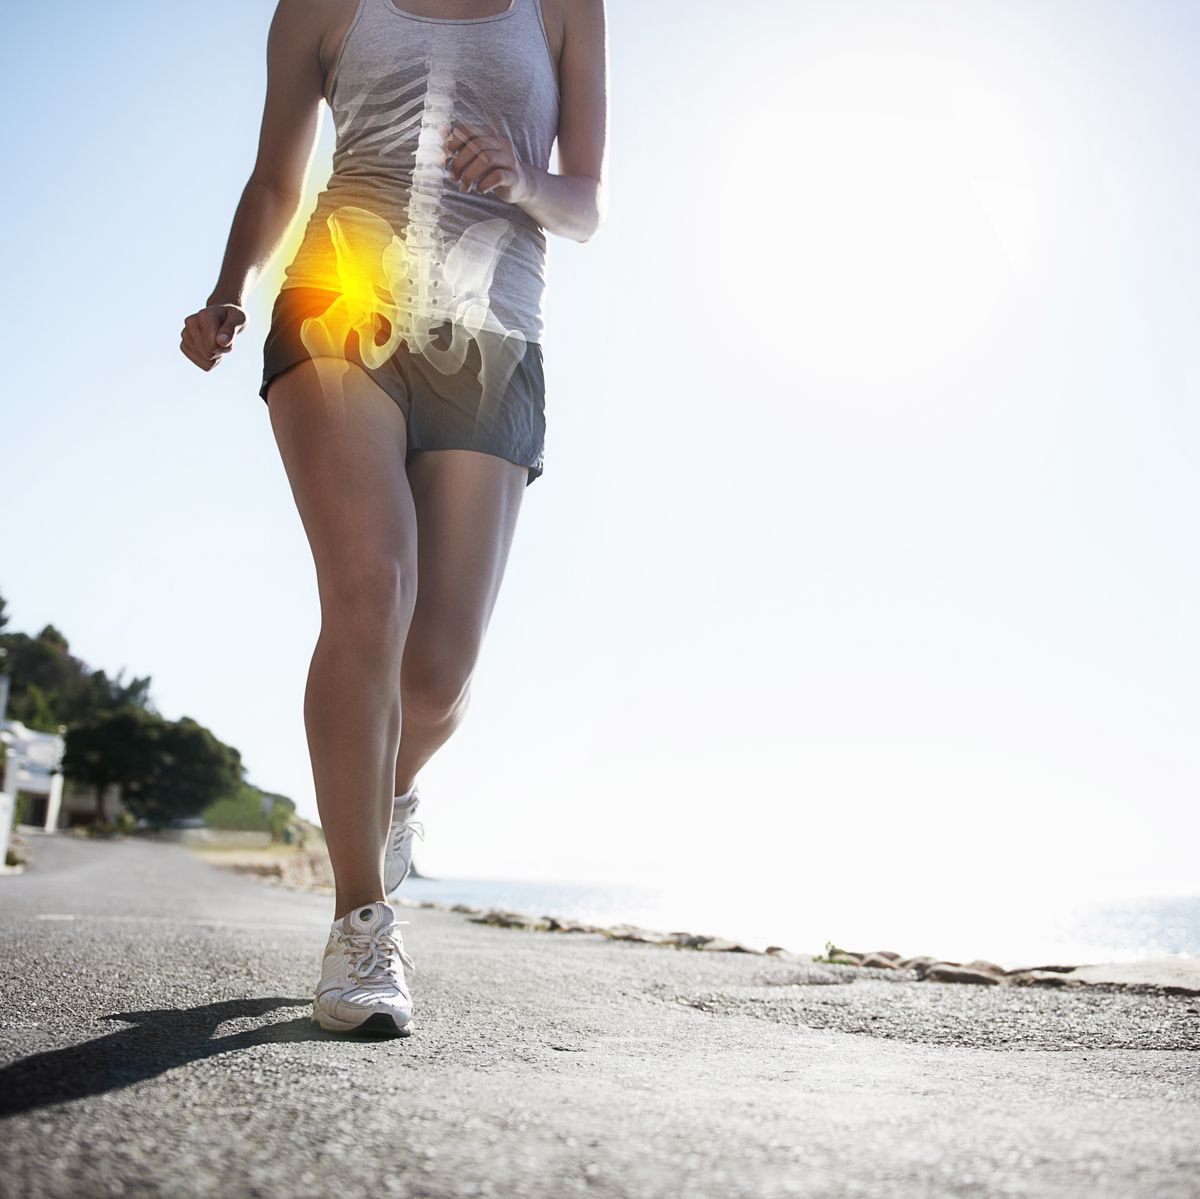 How to Fix Outer Hip Pain FOR GOOD 